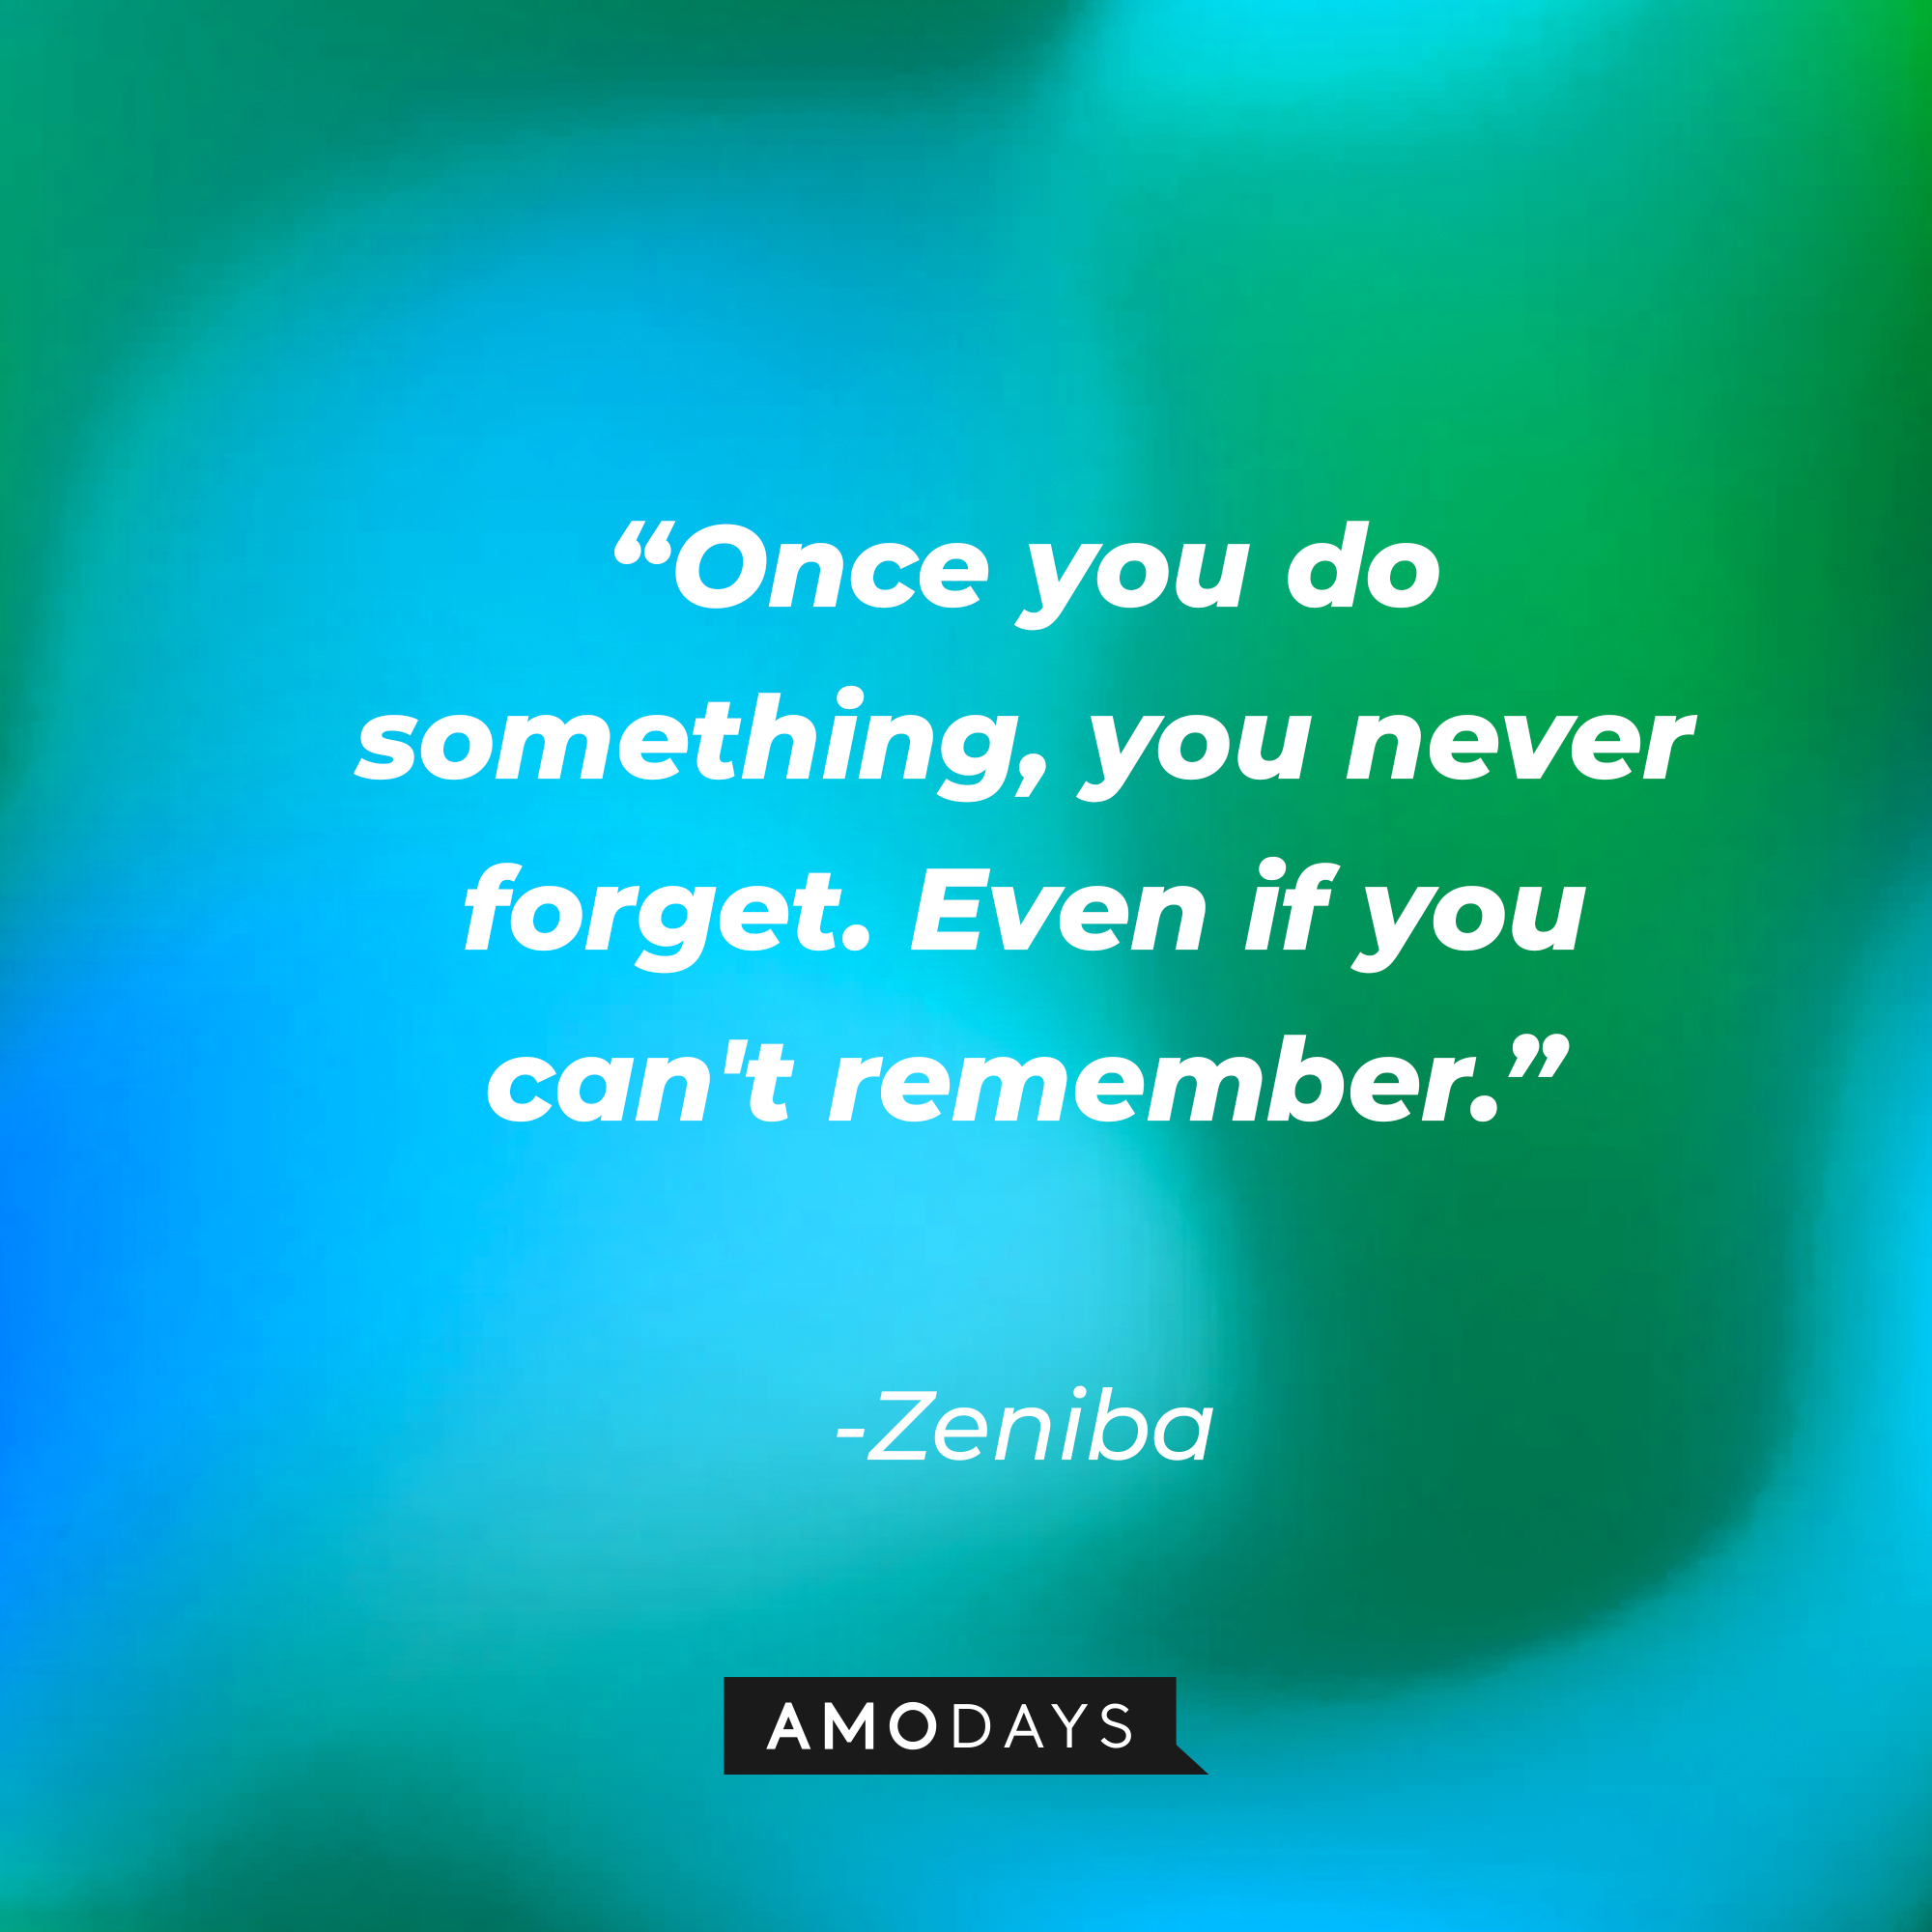 Zeniba’s quote: "Once you do something, you never forget. Even if you can't remember." | Source: AmoDays